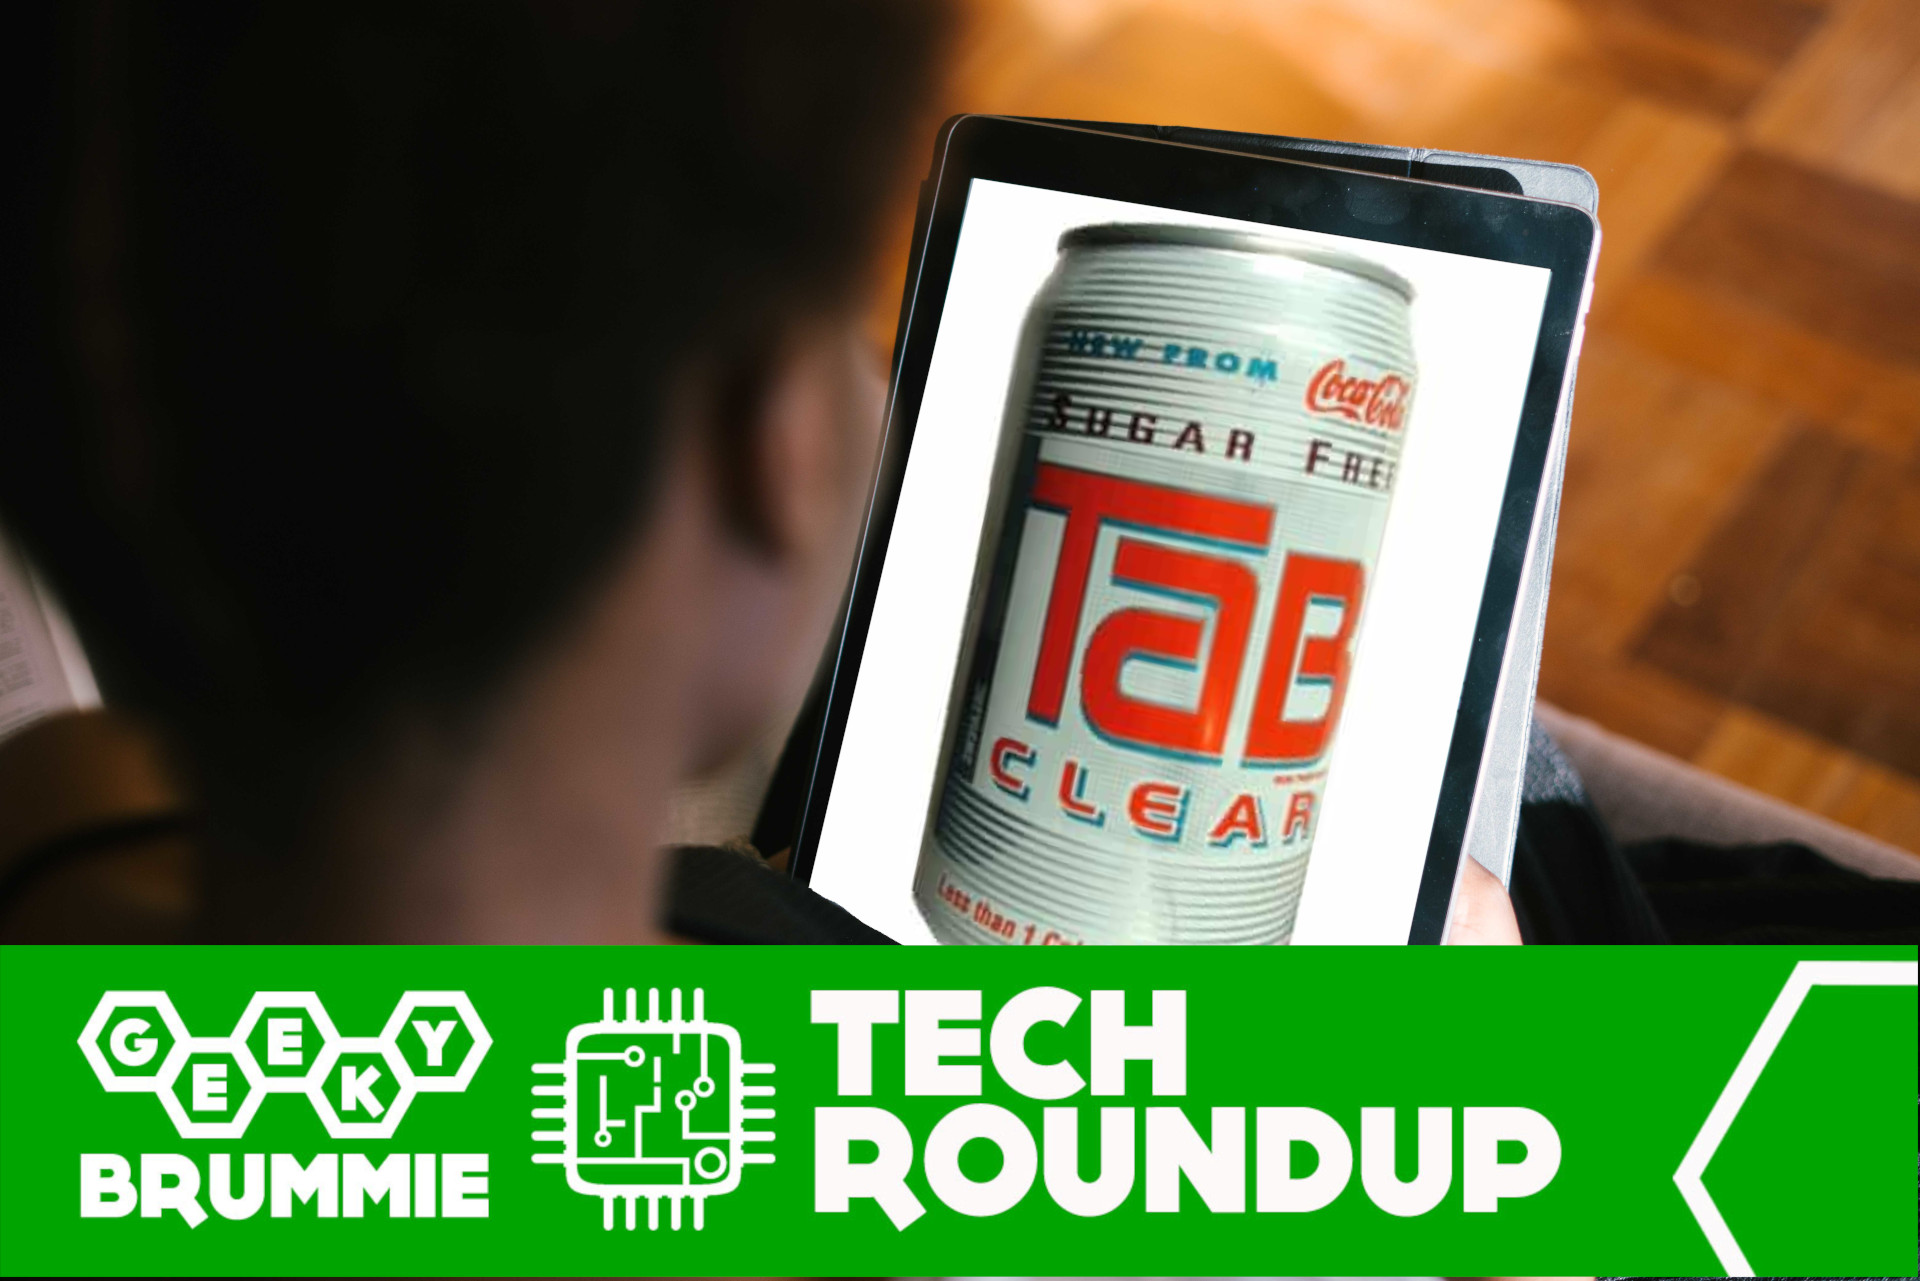 Tech Roundup – The Return of the (Android) Tab